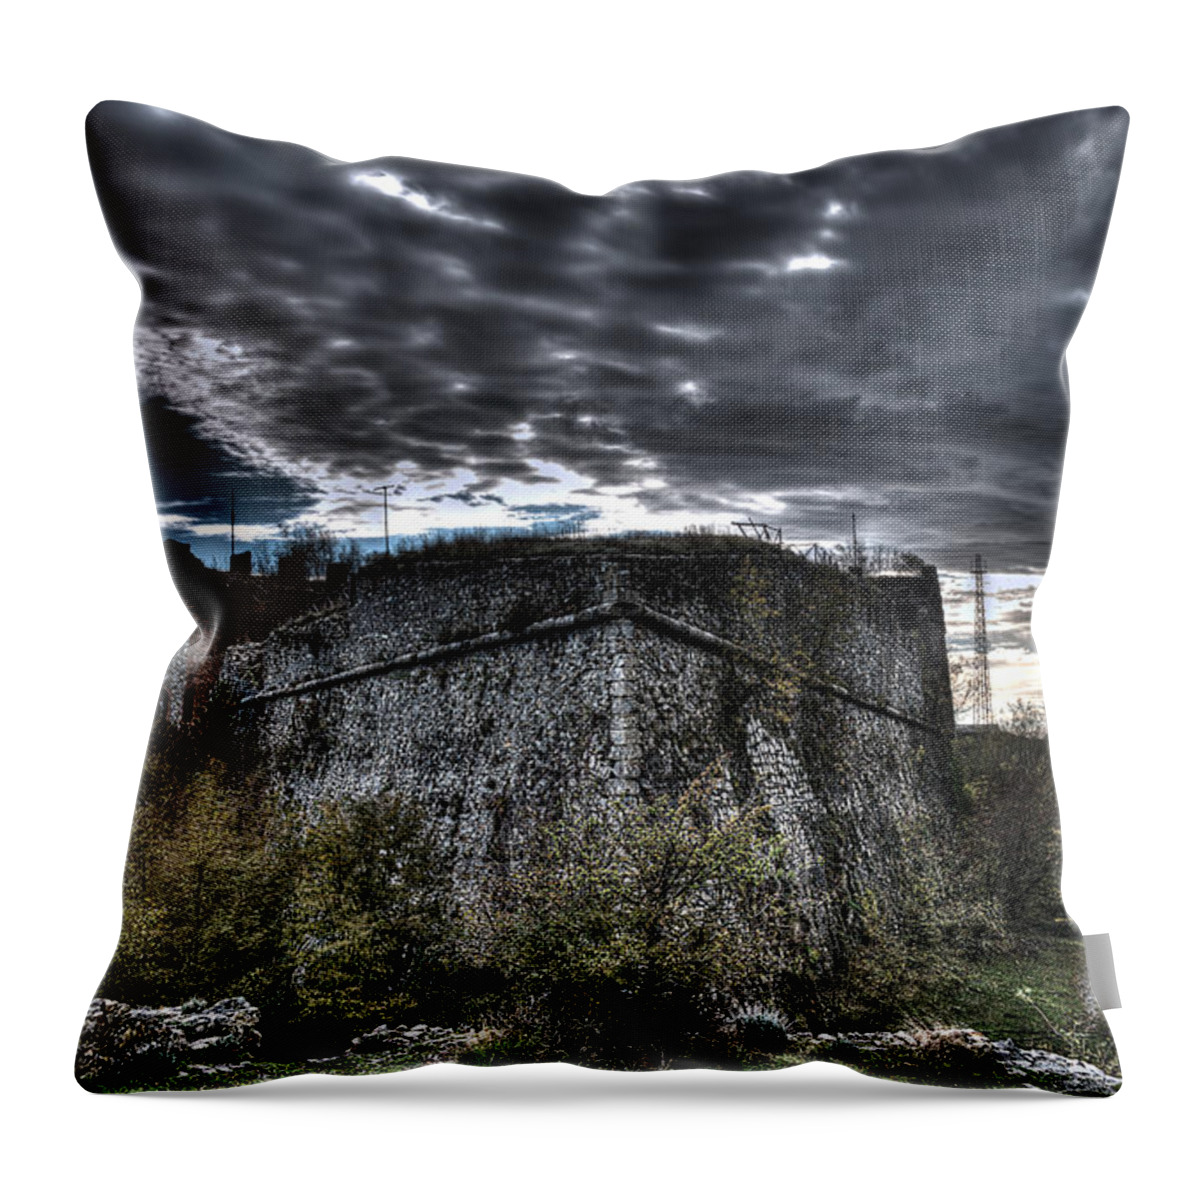 Genoa Forts Throw Pillow featuring the photograph The Fortress The Trees The Clouds by Enrico Pelos